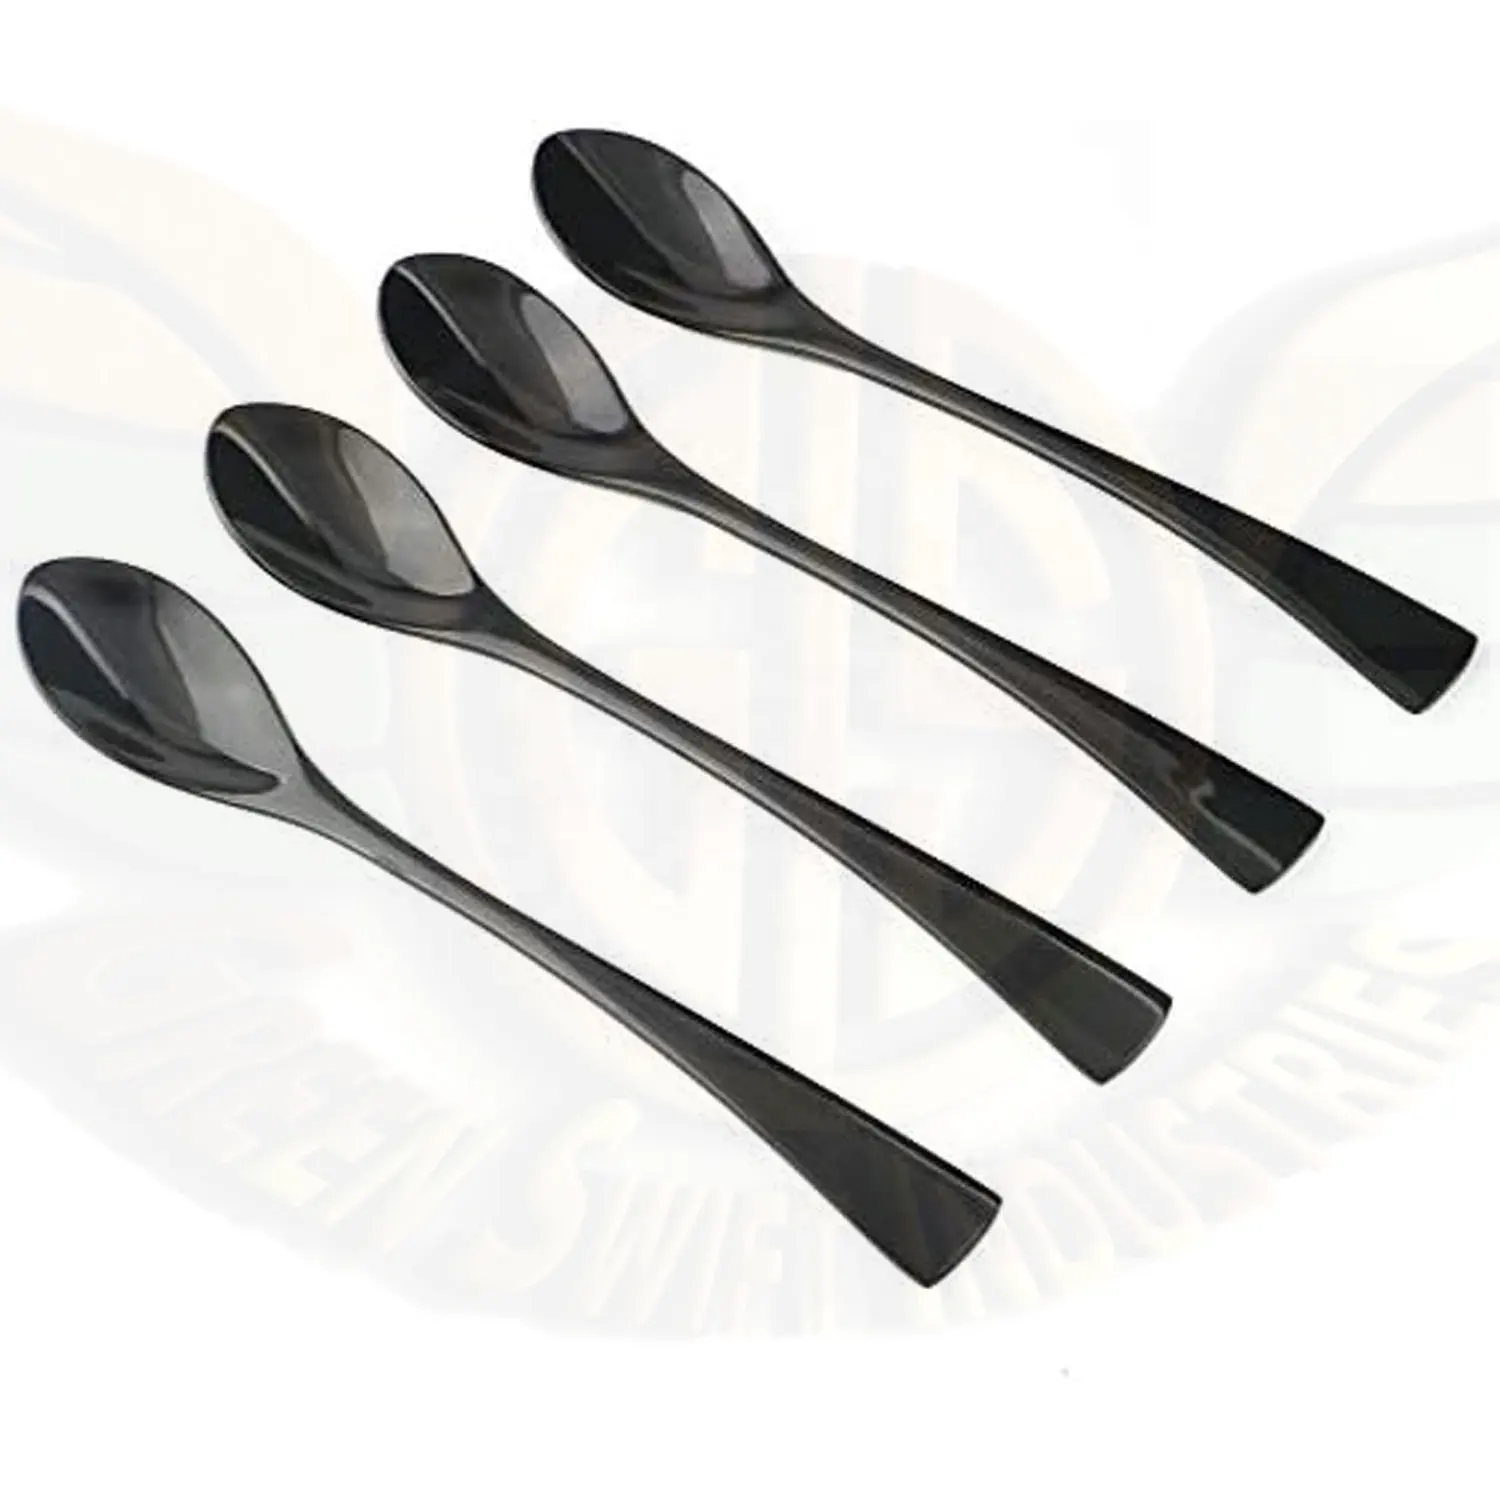 Quenelle Signature Rocher spoon large size Stainless steel best quality Wholesale Suppliers in cheap price from GSI